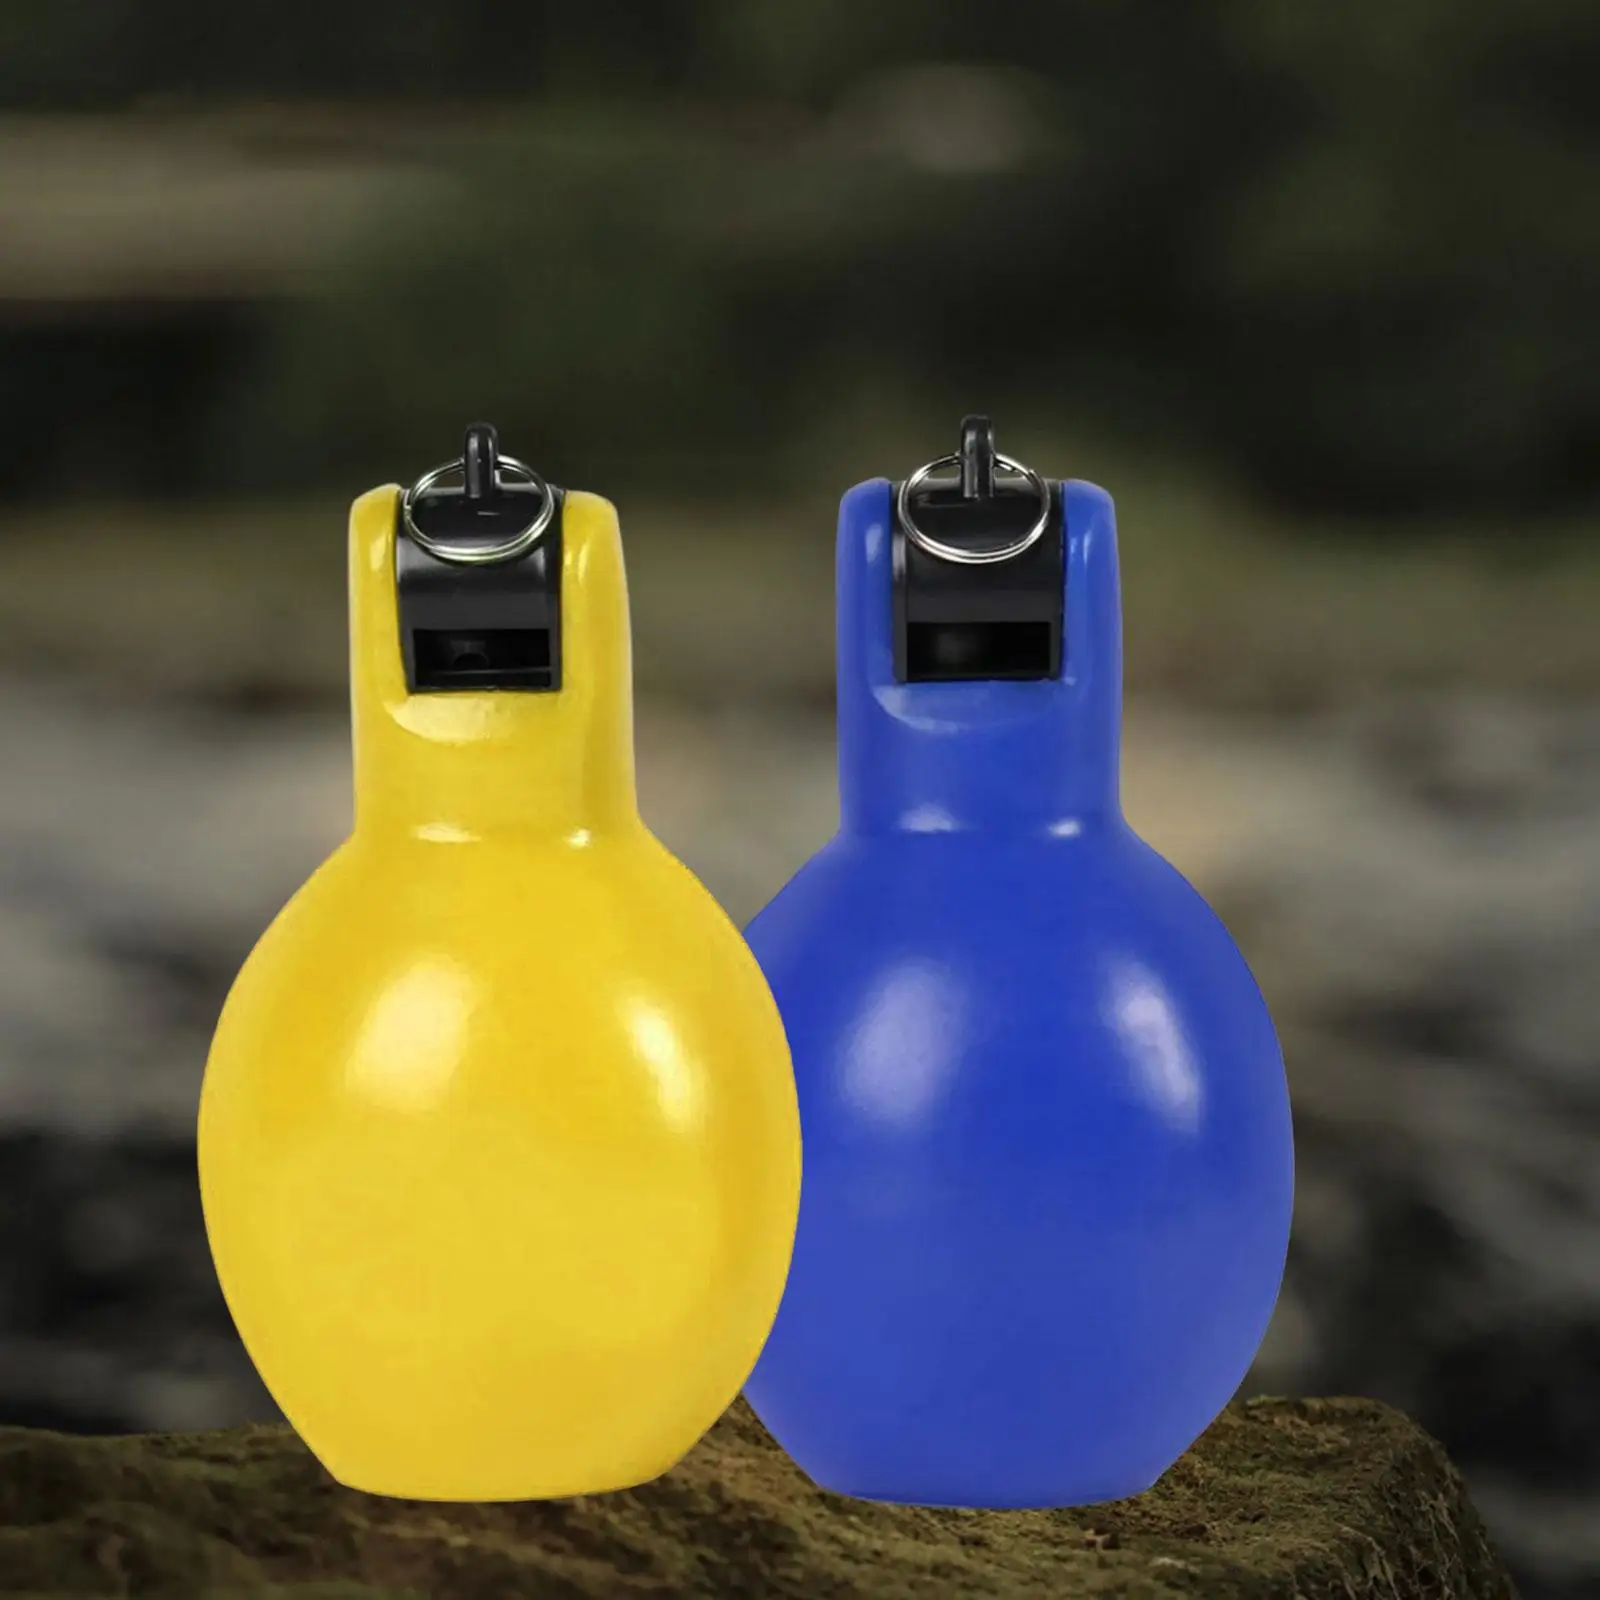 2 Pieces Hand Squeeze Whistles Loud Sports Whistle for Hiking Indoor Outdoor